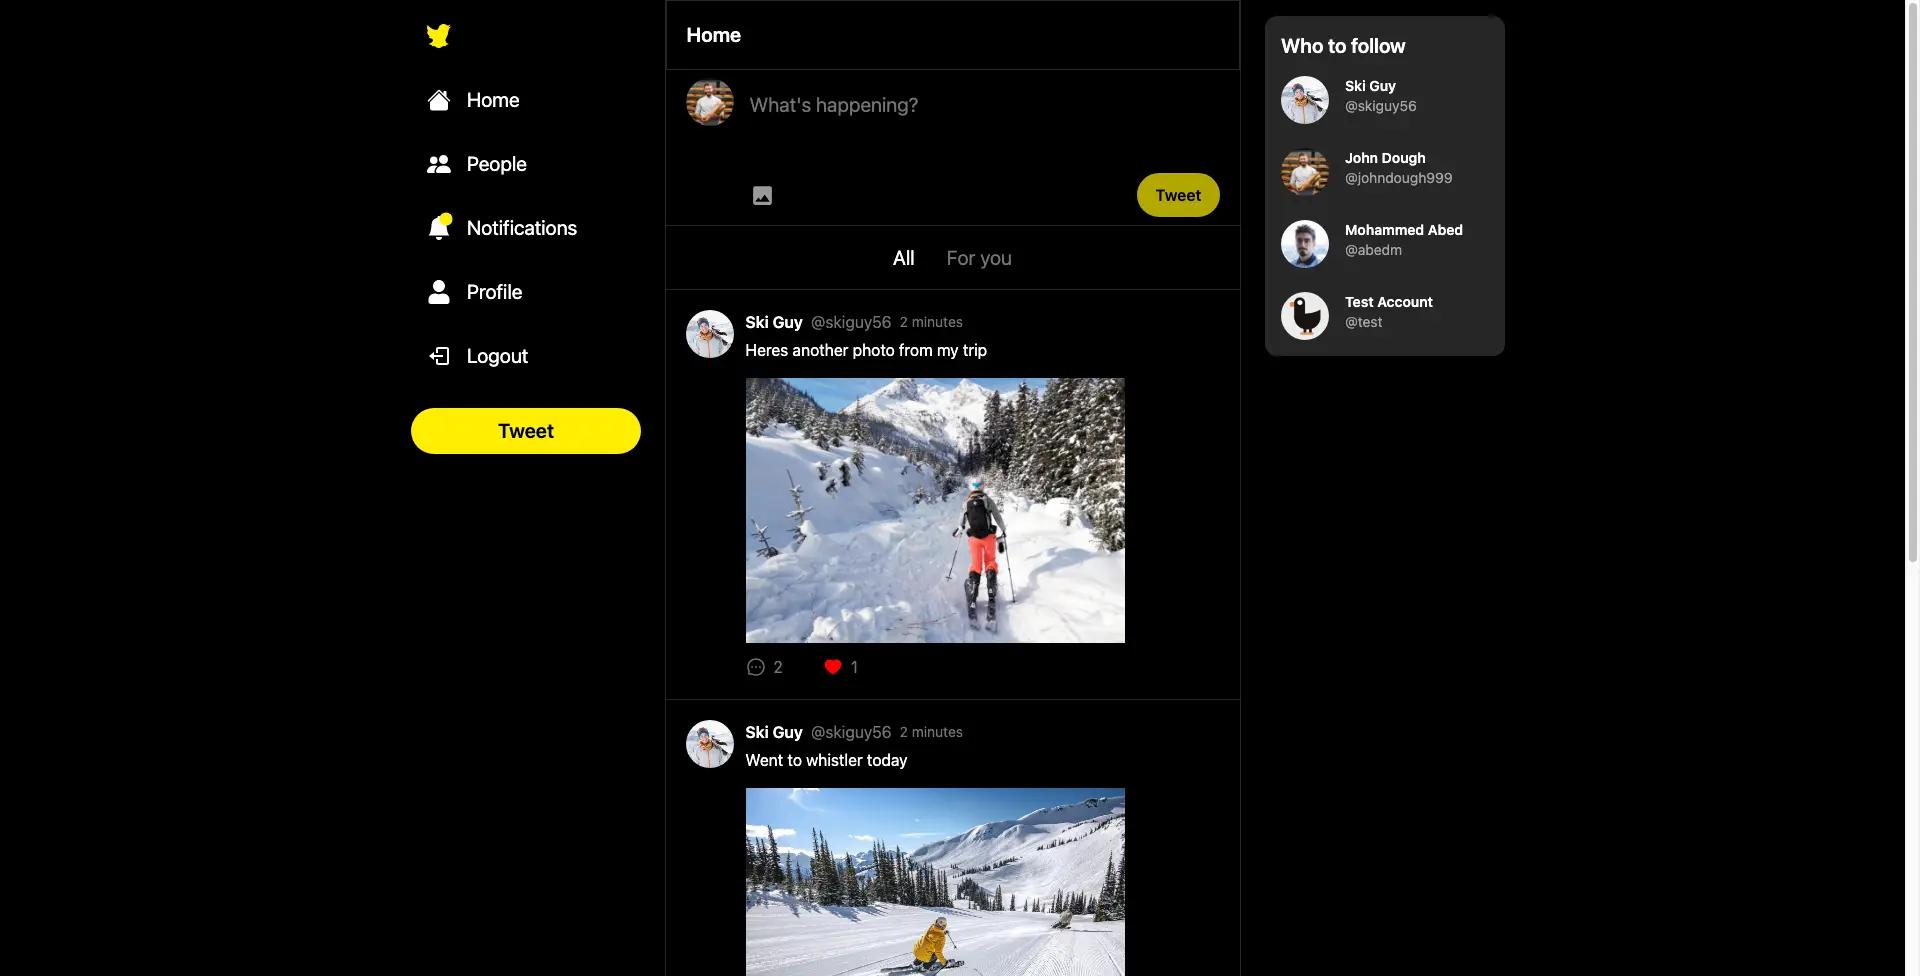 Showcase of Snapwitter, with a feed of tweets from other users